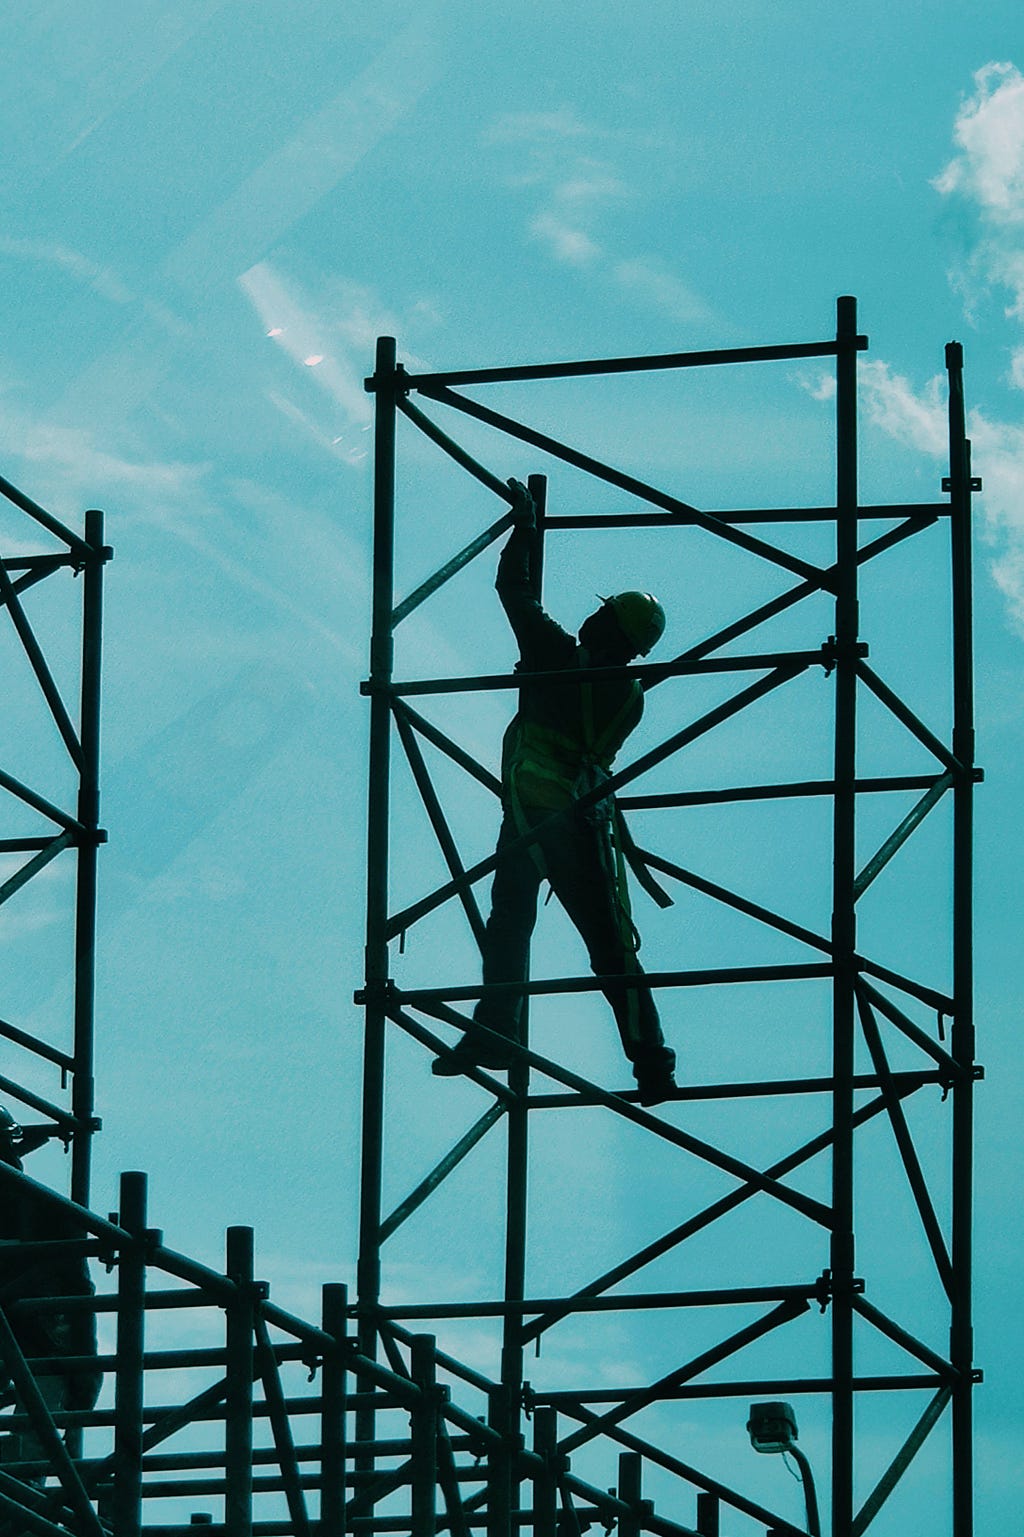 A construction worker stands precariously on scaffolding, suspended in the air, under a blue sky.